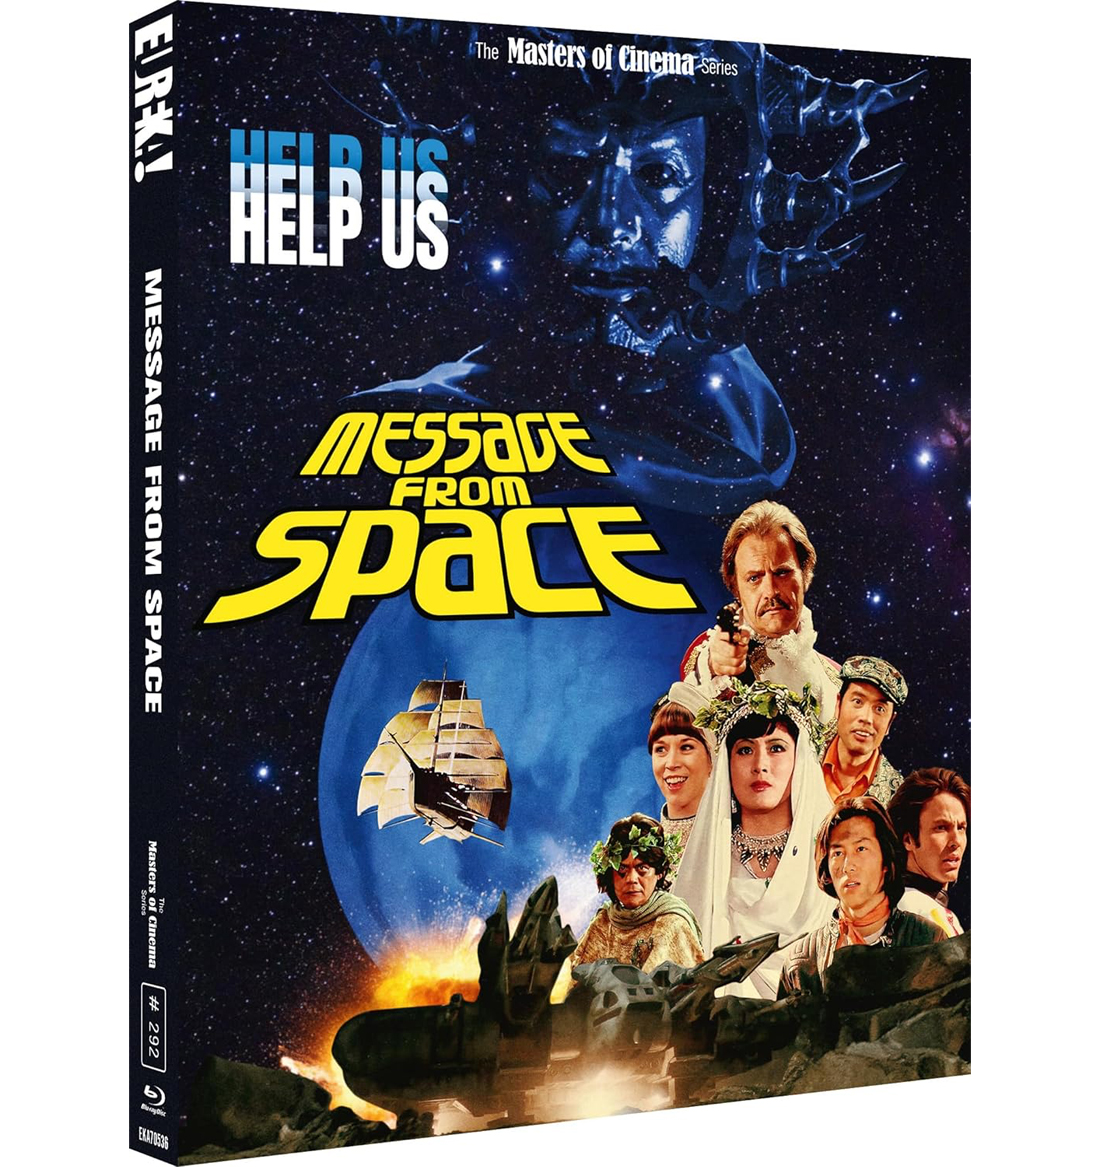 Director Fukusaku Kinji's response to the worldwide success of STAR WARS, the science fiction adventure MESSAGE FROM SPACE is being released on Blu-ray by @Eurekavideo as part of the @mastersofcinema series on 22 July tinyurl.com/4867w33v